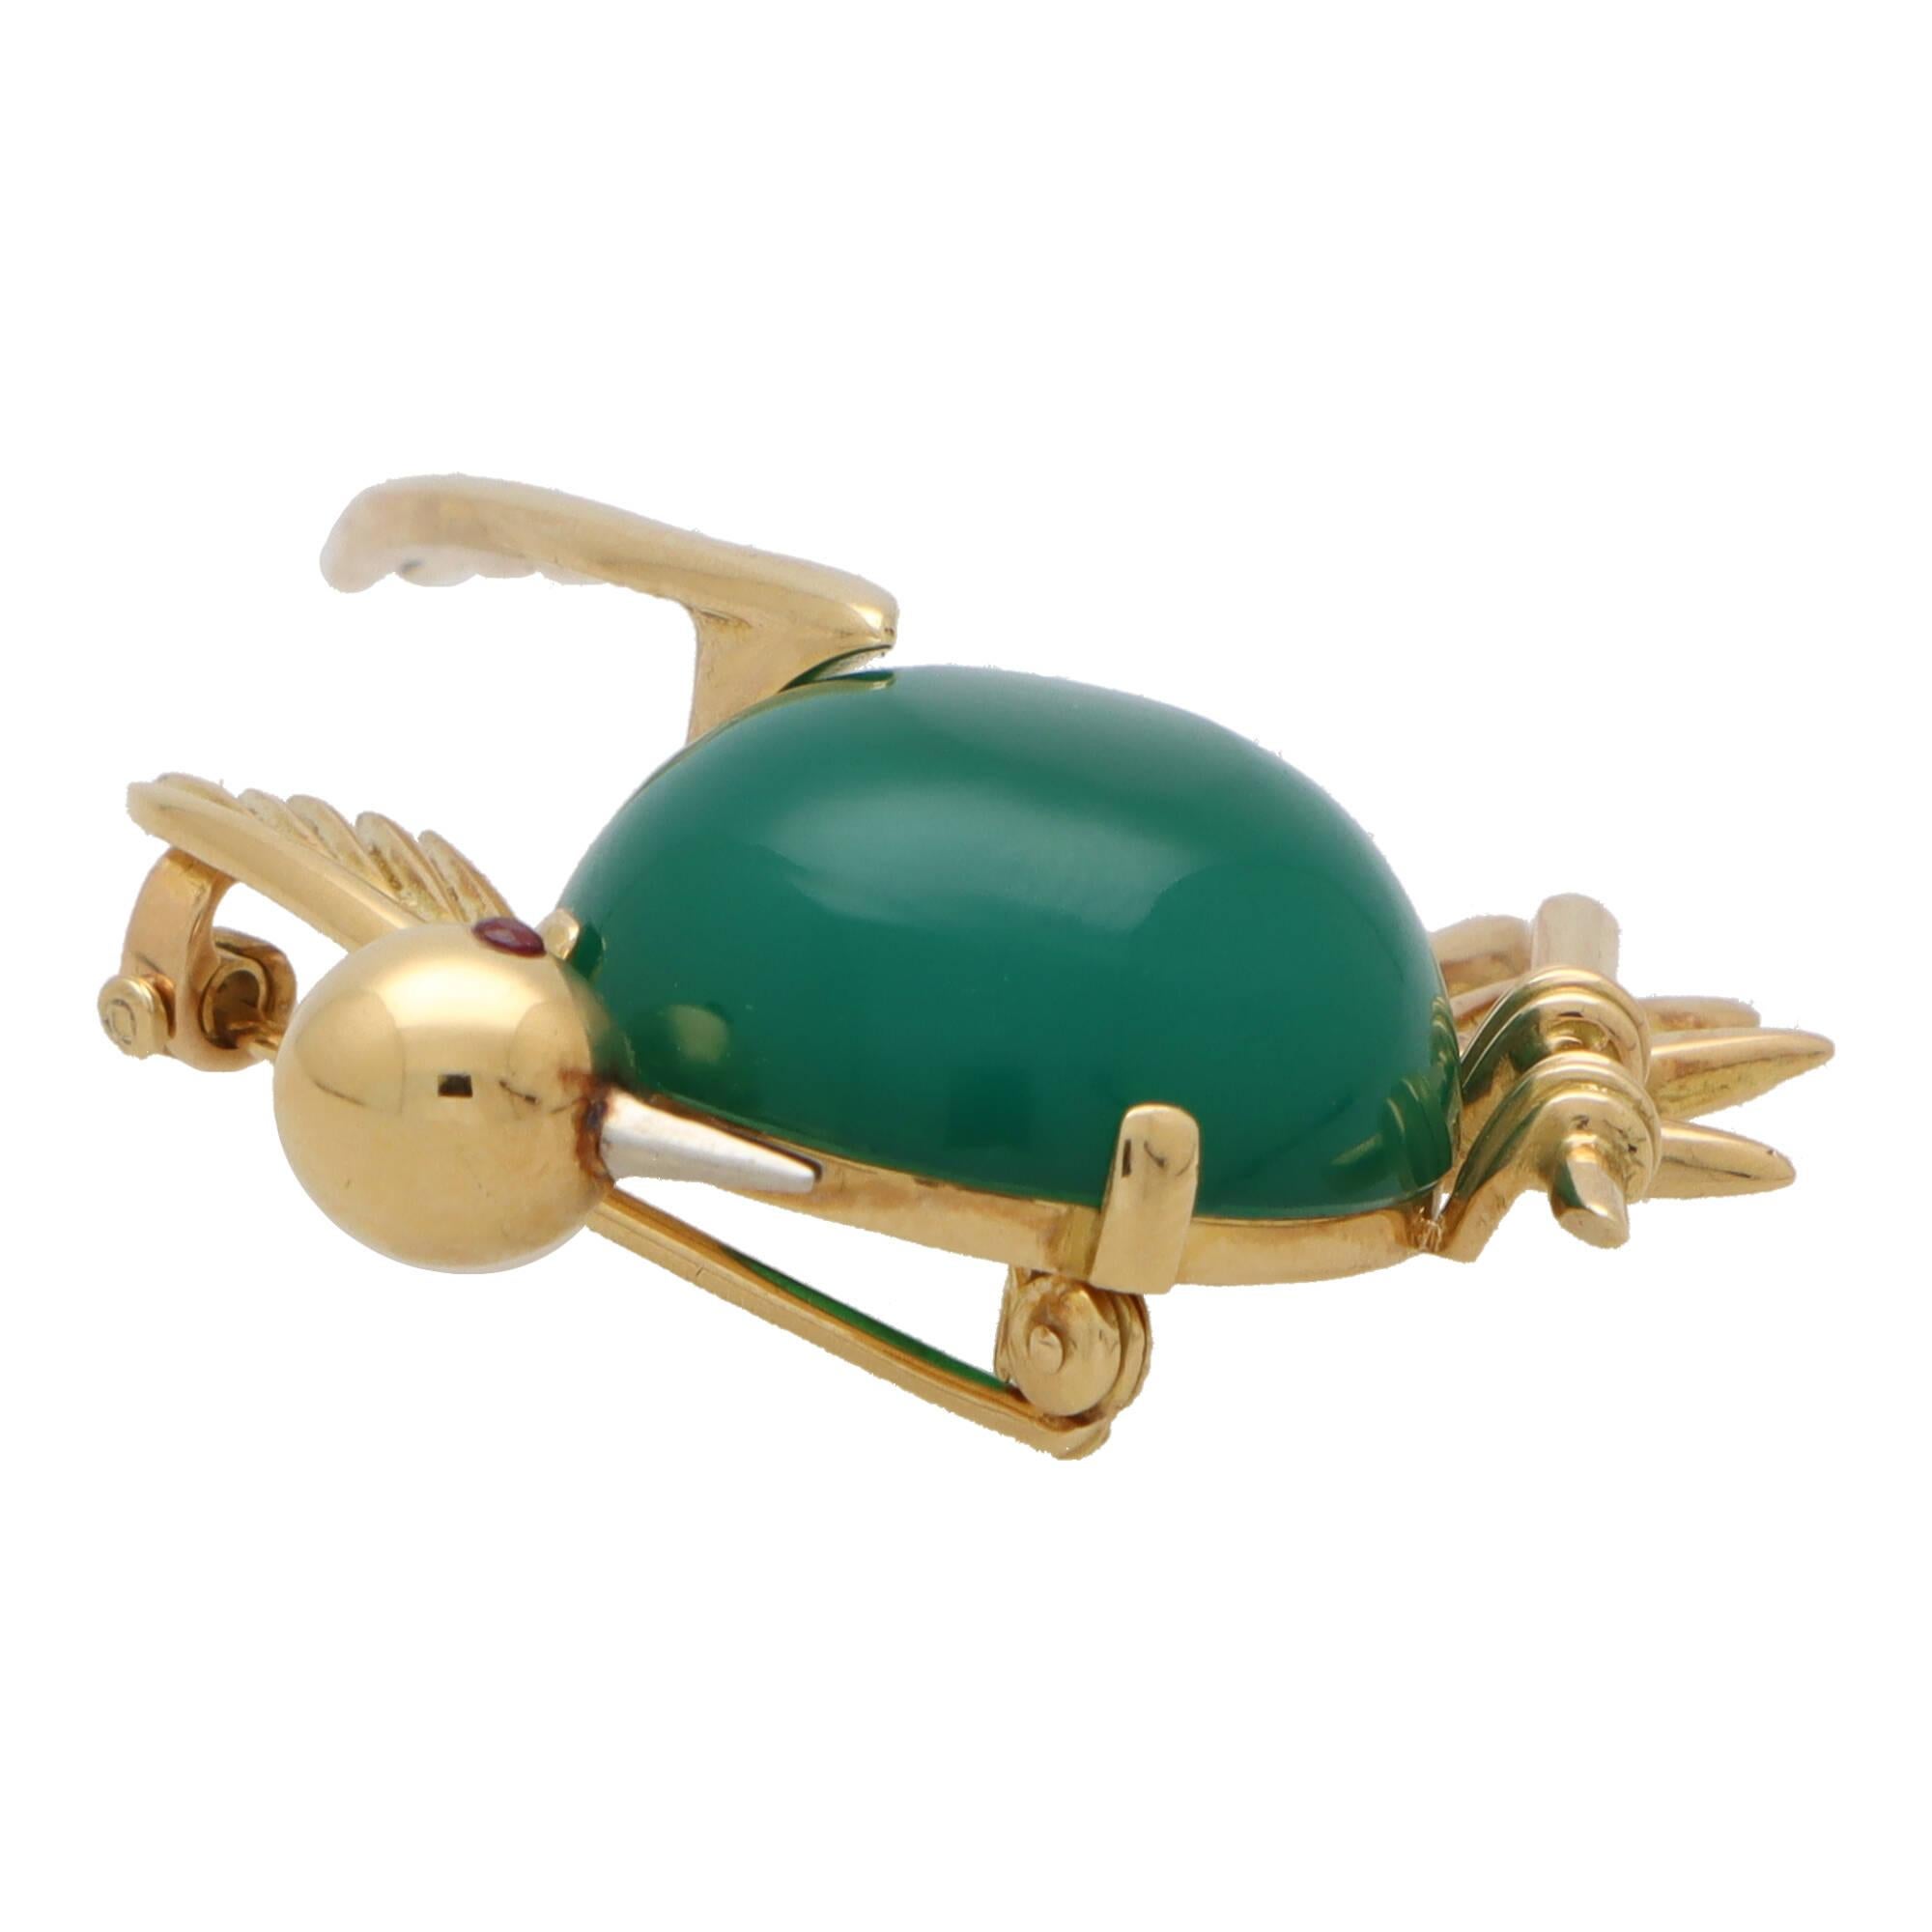 A beautiful vintage Piaget chrysoprase bird brooch set in 18k yellow gold. 

From a discontinued collection, the brooch depicts a bird perching on a branch. The main body of the bird is composed of a large 20mm blue-ish green cabochon chrysoprase